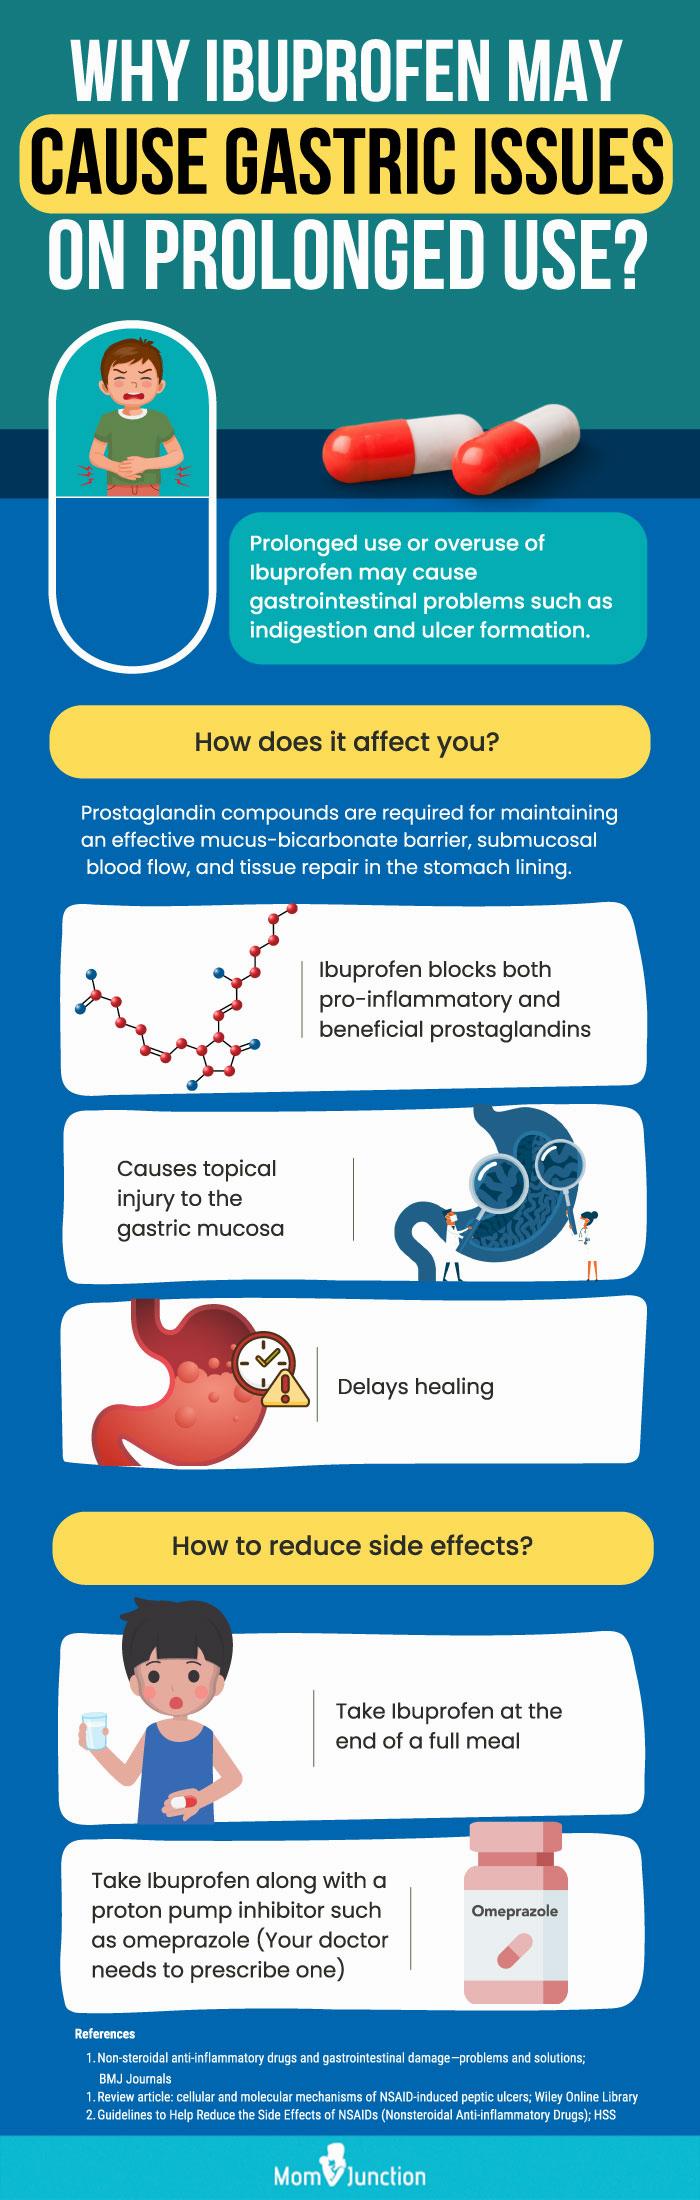 This infographic explains how prolonged use of ibuprofen may cause gastric issues such as indigestion and ulcer formation.